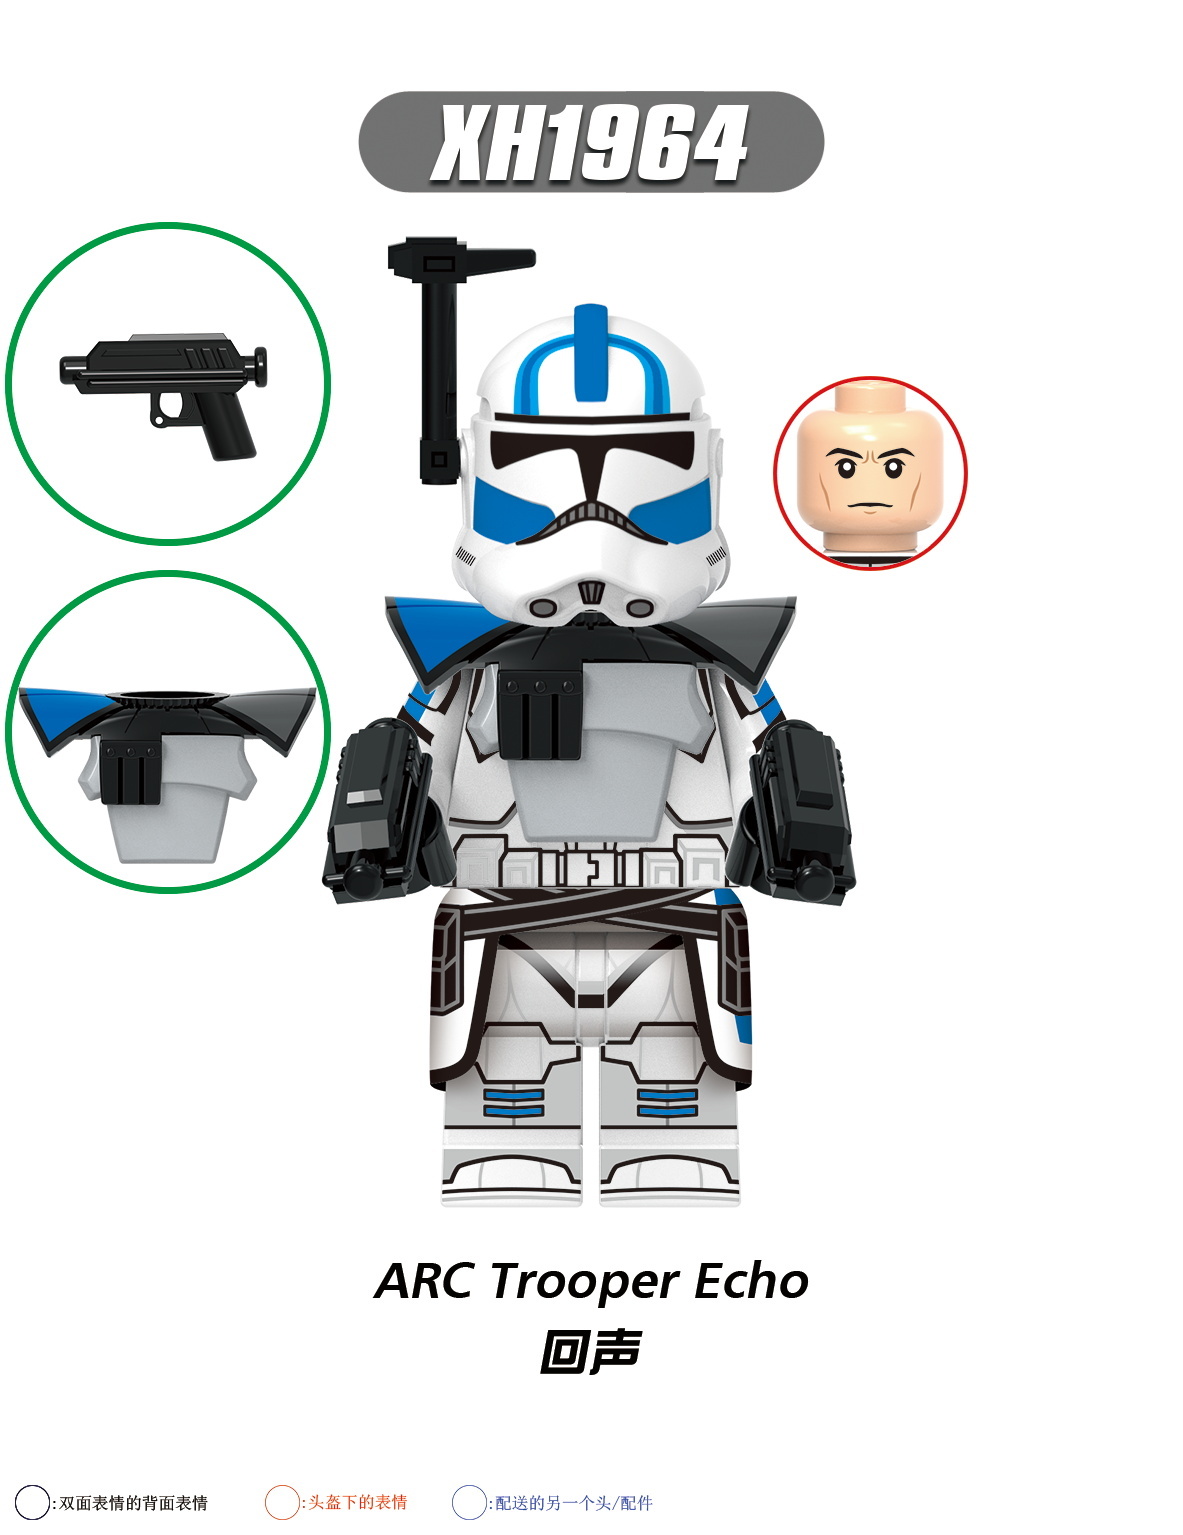 X0344 1964  1965 1966 1967 1968 1969 1970 1971 Star Wars Building Blocks ARC Trooper Echo Tup Clone Trooper Action Figures Educational Toys For Kids Gifts